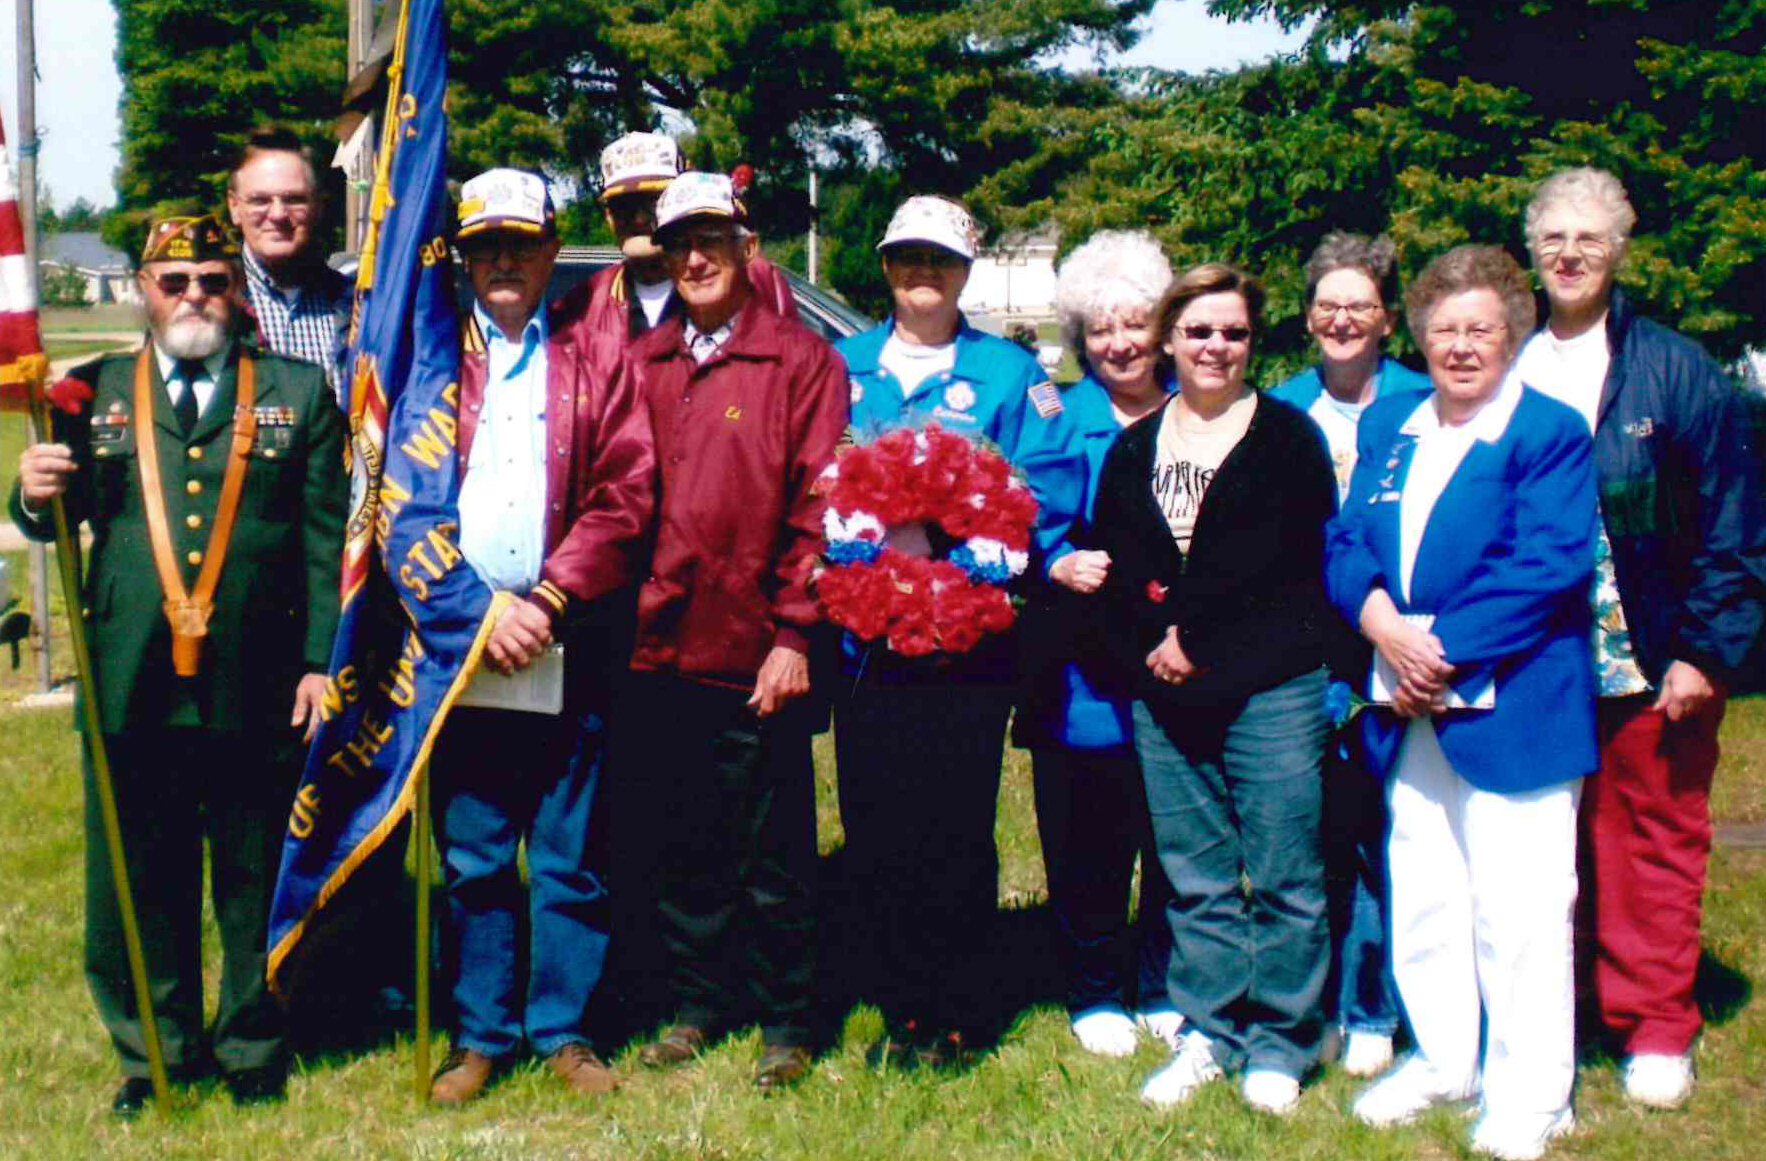 Weidman VFW members and supporters